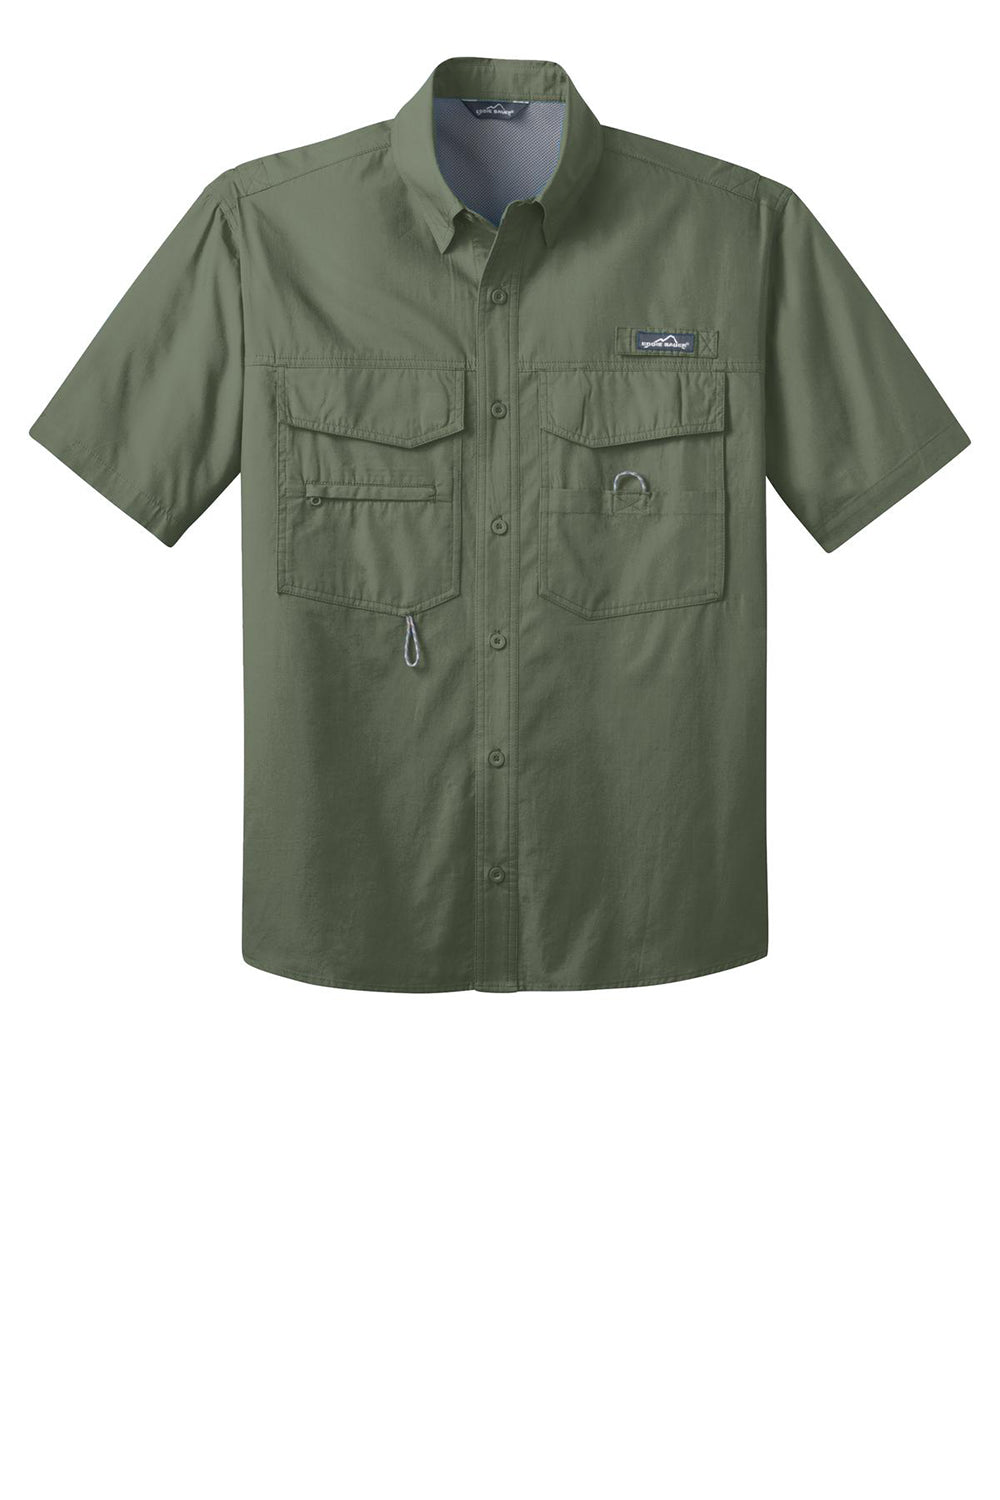 Eddie Bauer EB608 Mens Fishing Short Sleeve Button Down Shirt w/ Double Pockets Seagrass Green Flat Front